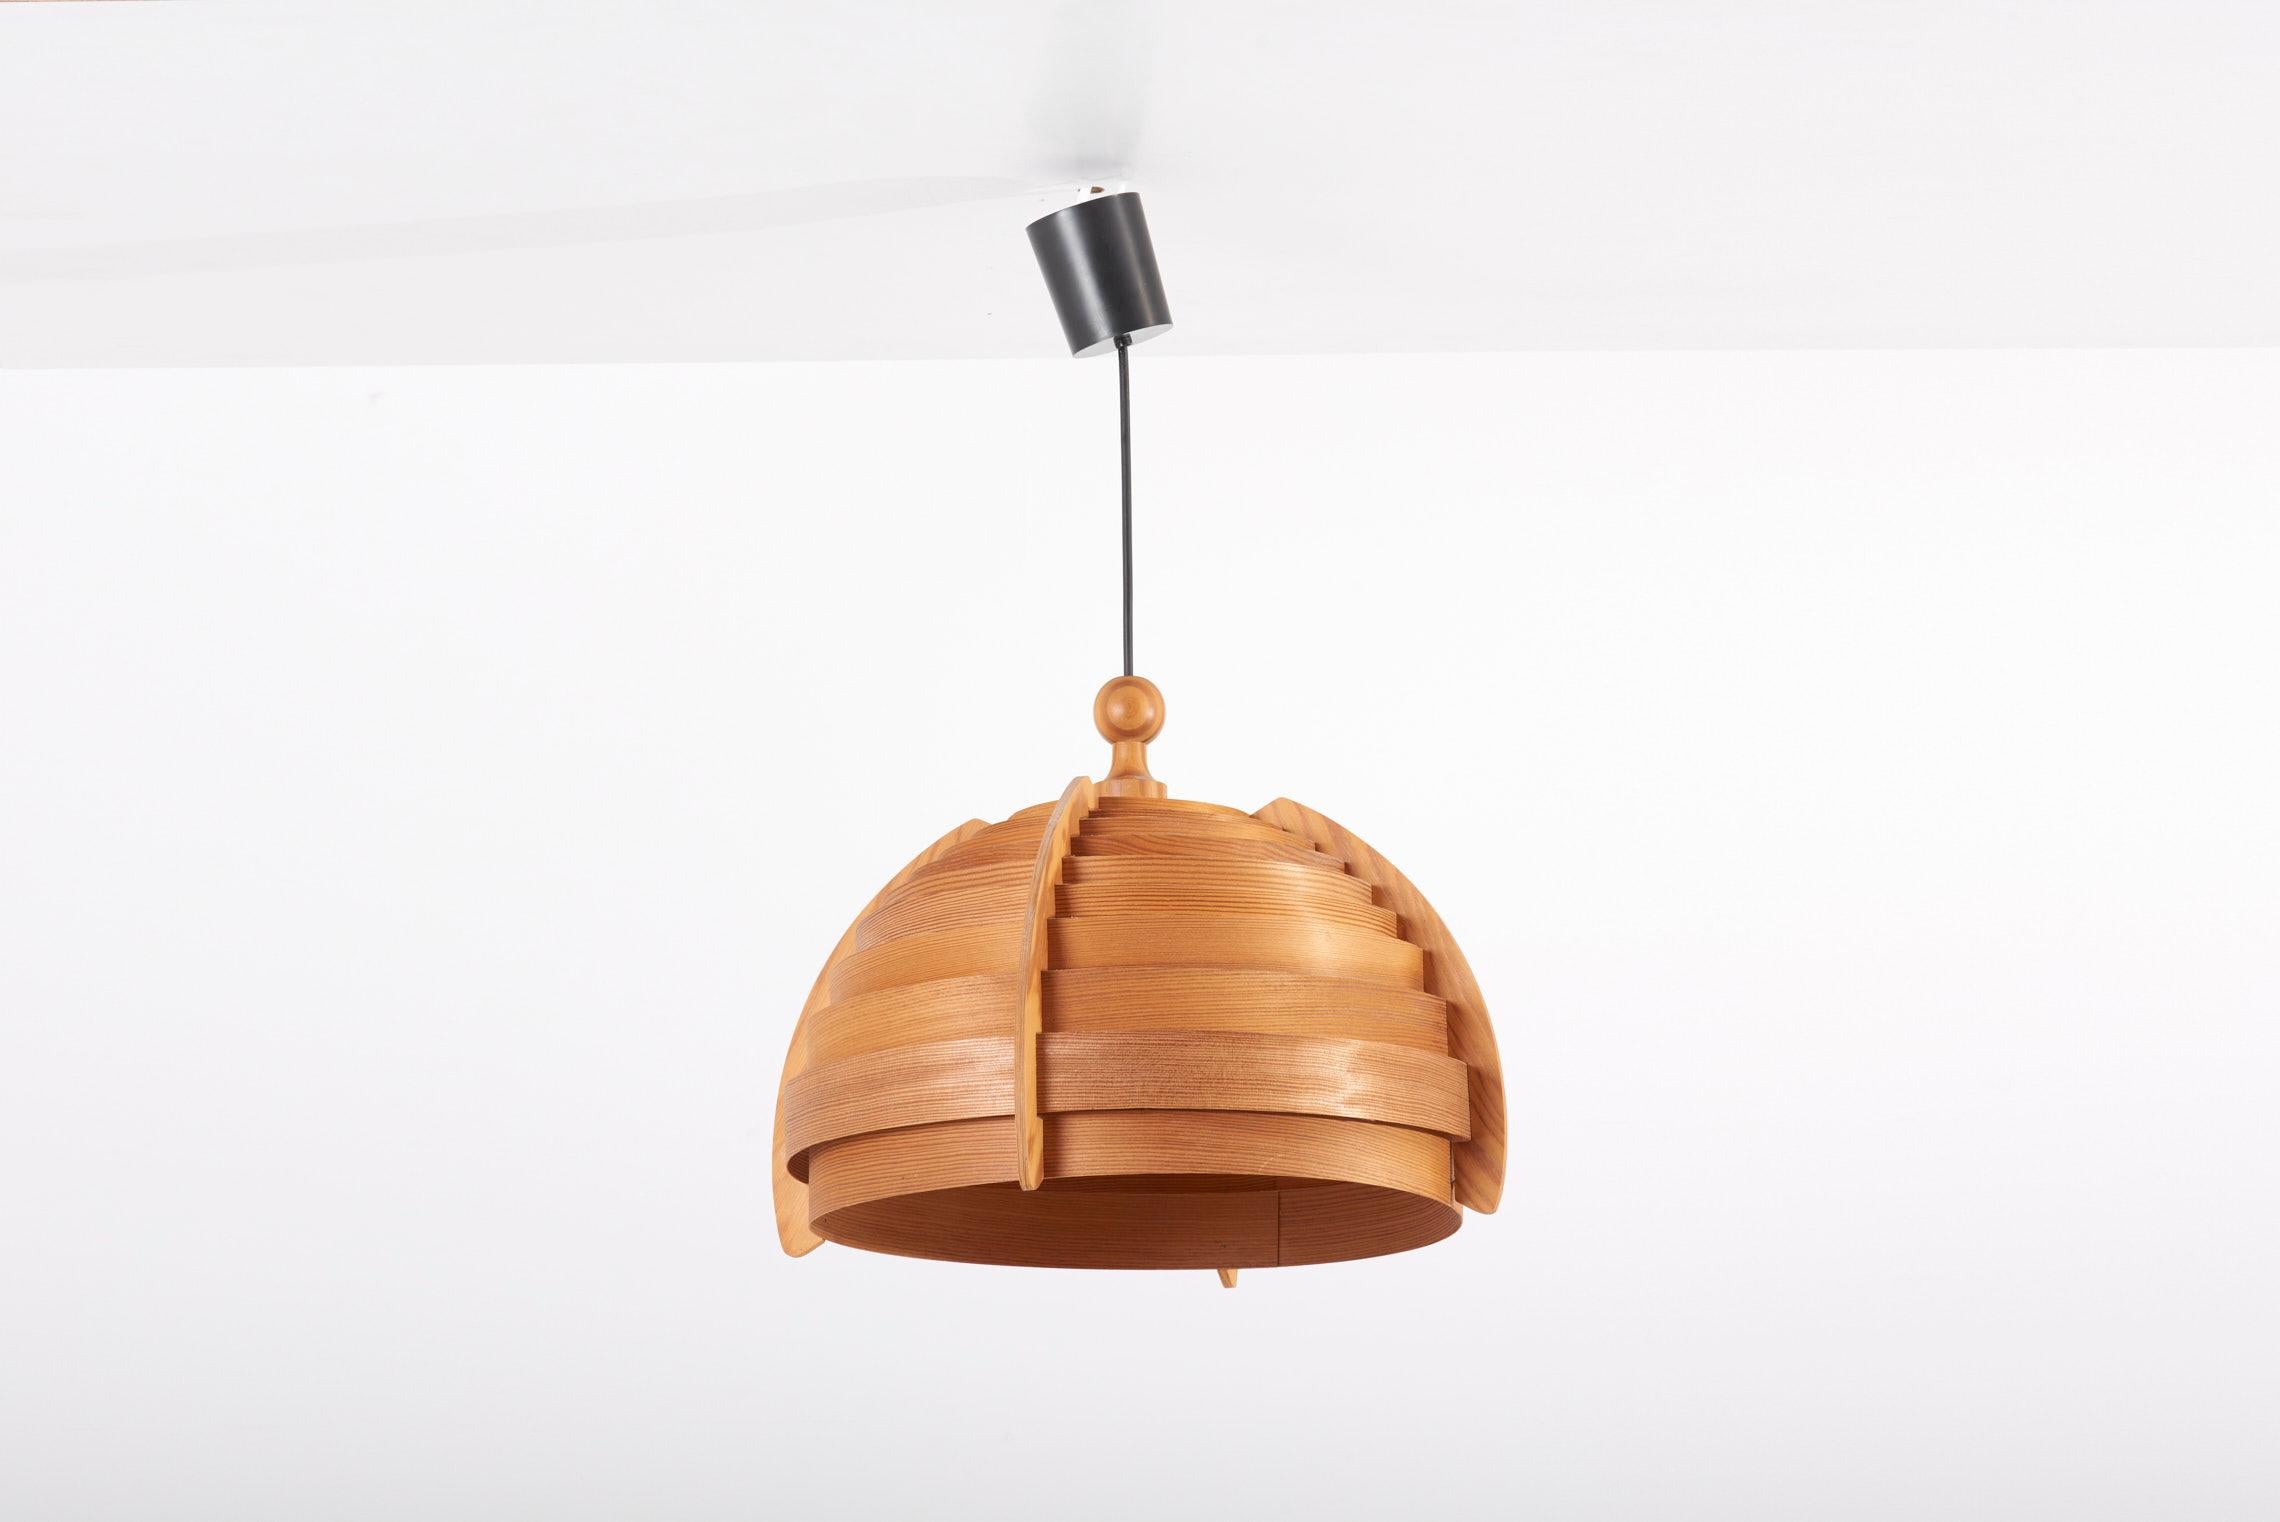 Wooden pendant lamp, designed in 1960s by Hans-Agne Jakobsson and manufactured by AB Ellysett Markaryd in Sweden.

2 x E27 socket.

Please note: Lamp should be fitted professionally in accordance to local requirements.